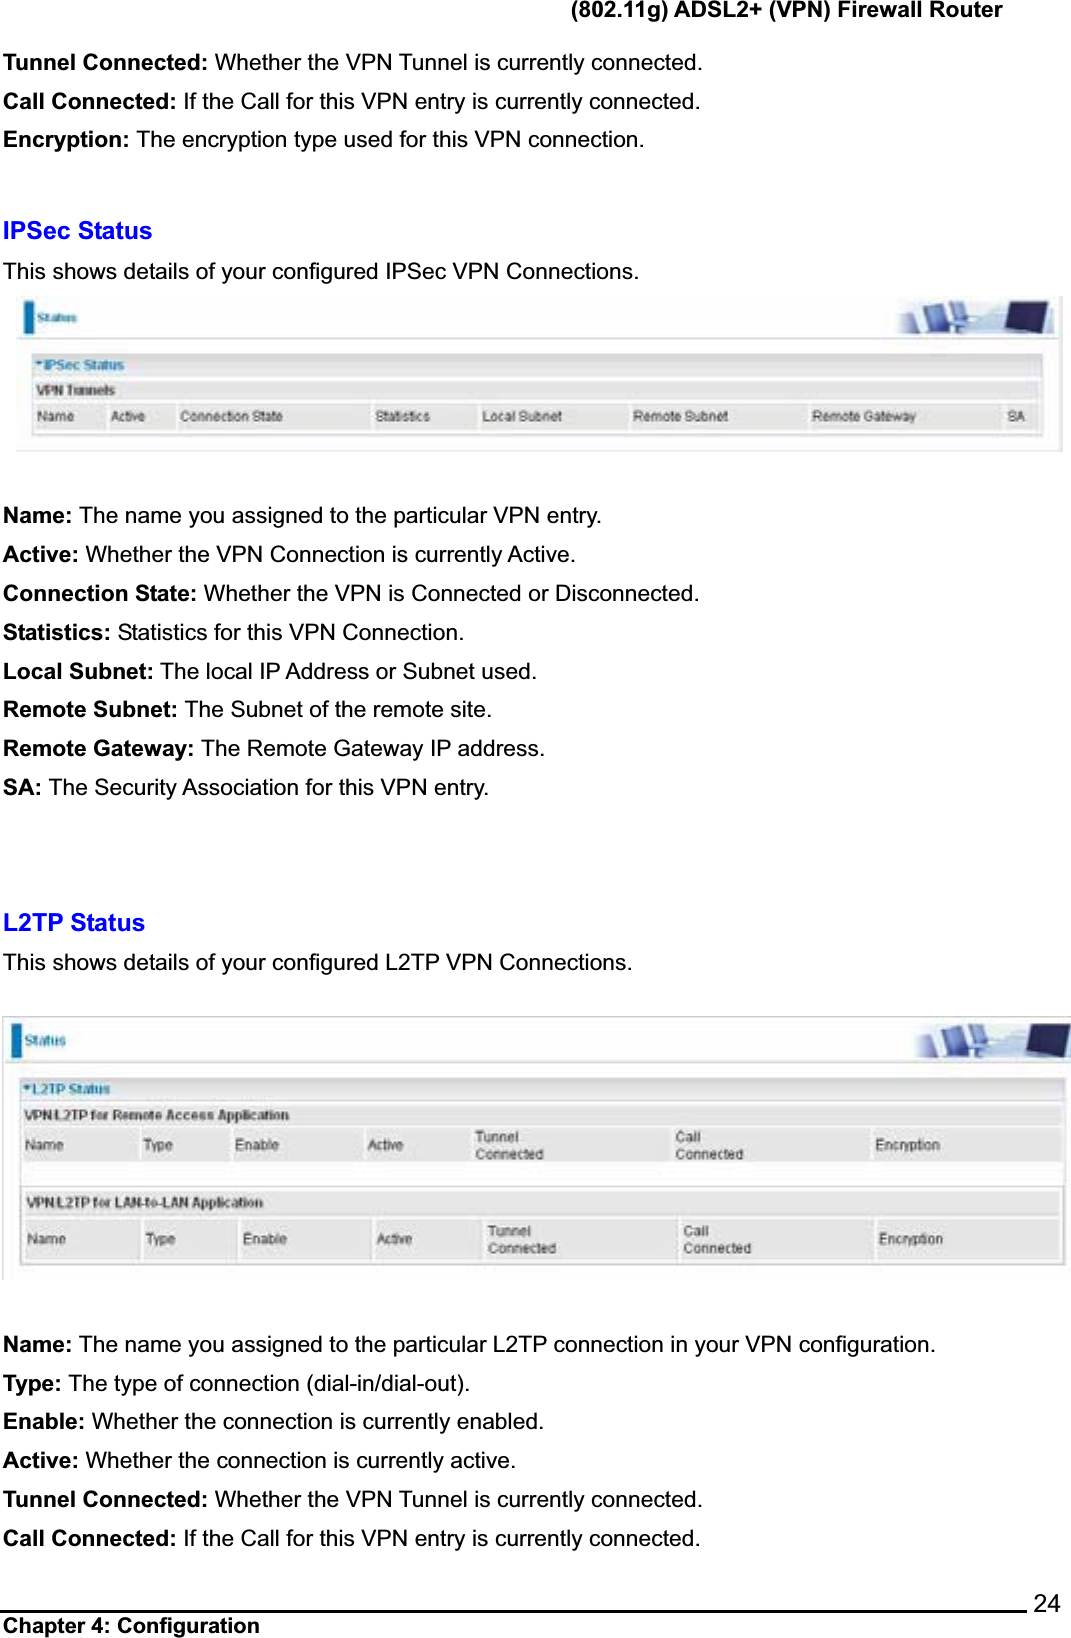       (802.11g) ADSL2+ (VPN) Firewall Router Chapter 4: Configuration    24Tunnel Connected: Whether the VPN Tunnel is currently connected. Call Connected: If the Call for this VPN entry is currently connected. Encryption: The encryption type used for this VPN connection. IPSec Status This shows details of your configured IPSec VPN Connections.Name: The name you assigned to the particular VPN entry. Active: Whether the VPN Connection is currently Active. Connection State: Whether the VPN is Connected or Disconnected. Statistics: Statistics for this VPN Connection. Local Subnet: The local IP Address or Subnet used. Remote Subnet: The Subnet of the remote site. Remote Gateway: The Remote Gateway IP address. SA: The Security Association for this VPN entry. L2TP Status   This shows details of your configured L2TP VPN Connections.Name: The name you assigned to the particular L2TP connection in your VPN configuration. Type: The type of connection (dial-in/dial-out). Enable: Whether the connection is currently enabled. Active: Whether the connection is currently active. Tunnel Connected: Whether the VPN Tunnel is currently connected. Call Connected: If the Call for this VPN entry is currently connected. 